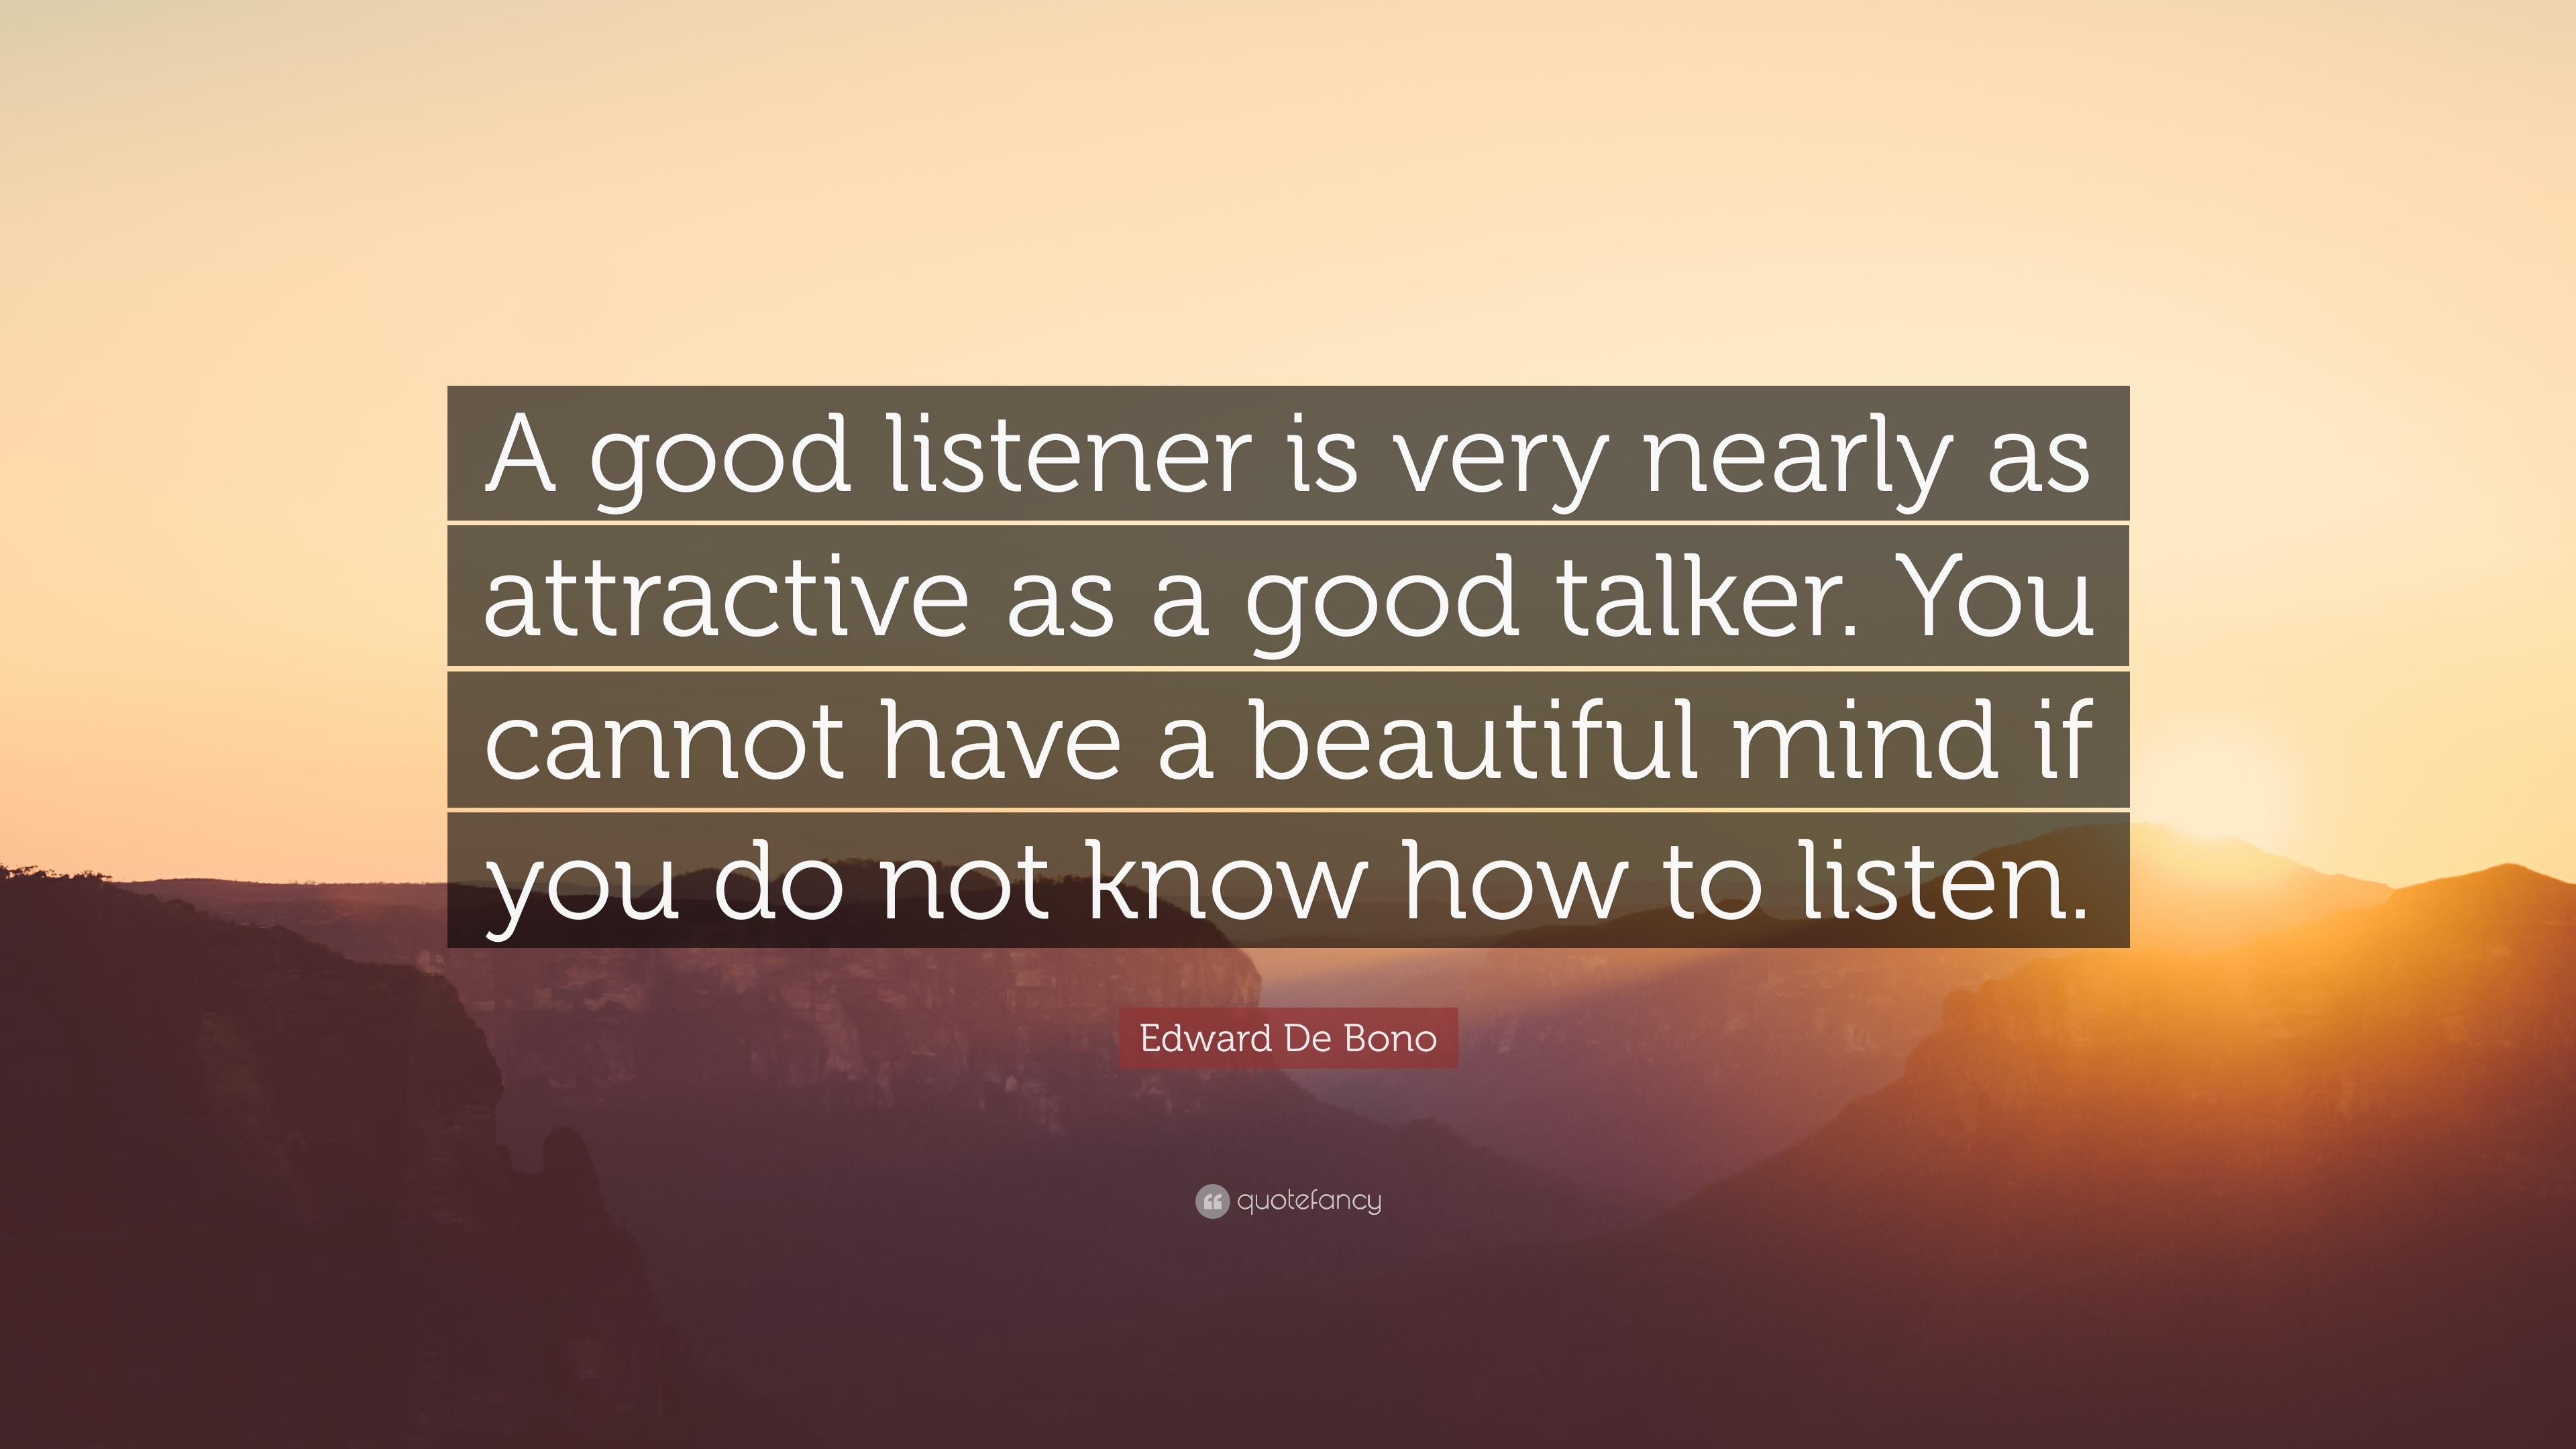 Edward De Bono Quote: “A good listener is very nearly as attractive